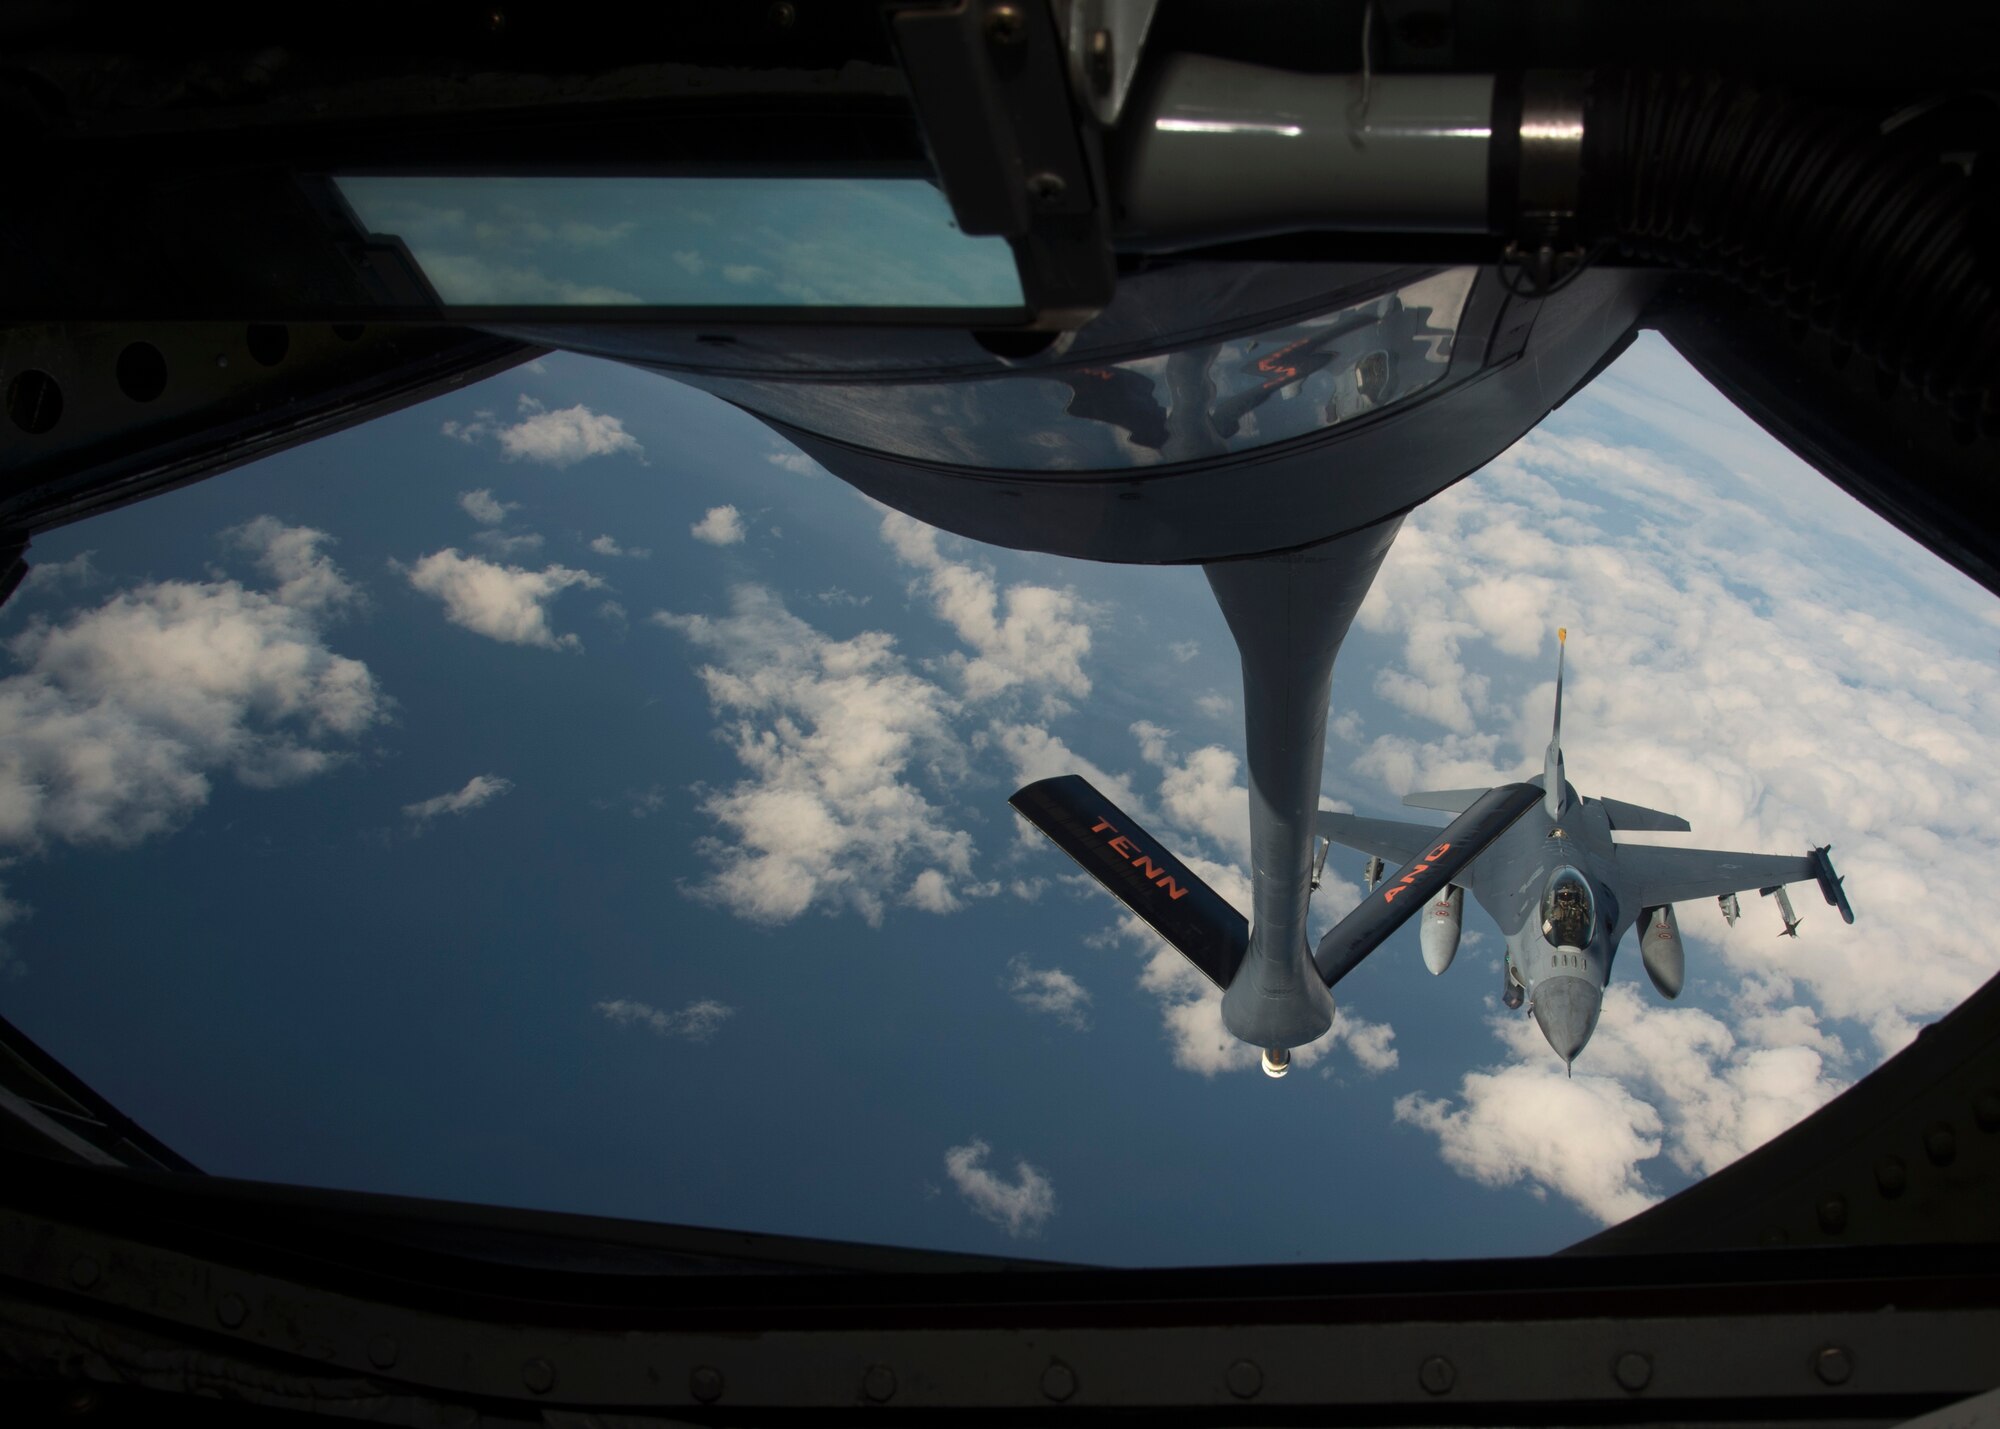 U.S. Air Force pilots assigned to the 13th and 14th Fighter Squadrons conduct air-to-air refueling with a KC-135 Stratotanker assigned to the 134th Air Refueling Wing, Tennessee Air National Guard, over Northern Japan, Jan. 18, 2017. Pilots must maintain tanker qualification every six months to stay proficient and capable for training and combat scenarios. Since refueling training missions are very complex, they are vital for younger pilots to develop good skills and habit patterns that will help them in the future. (U.S. Air Force photo by Senior Airman Deana Heitzman)